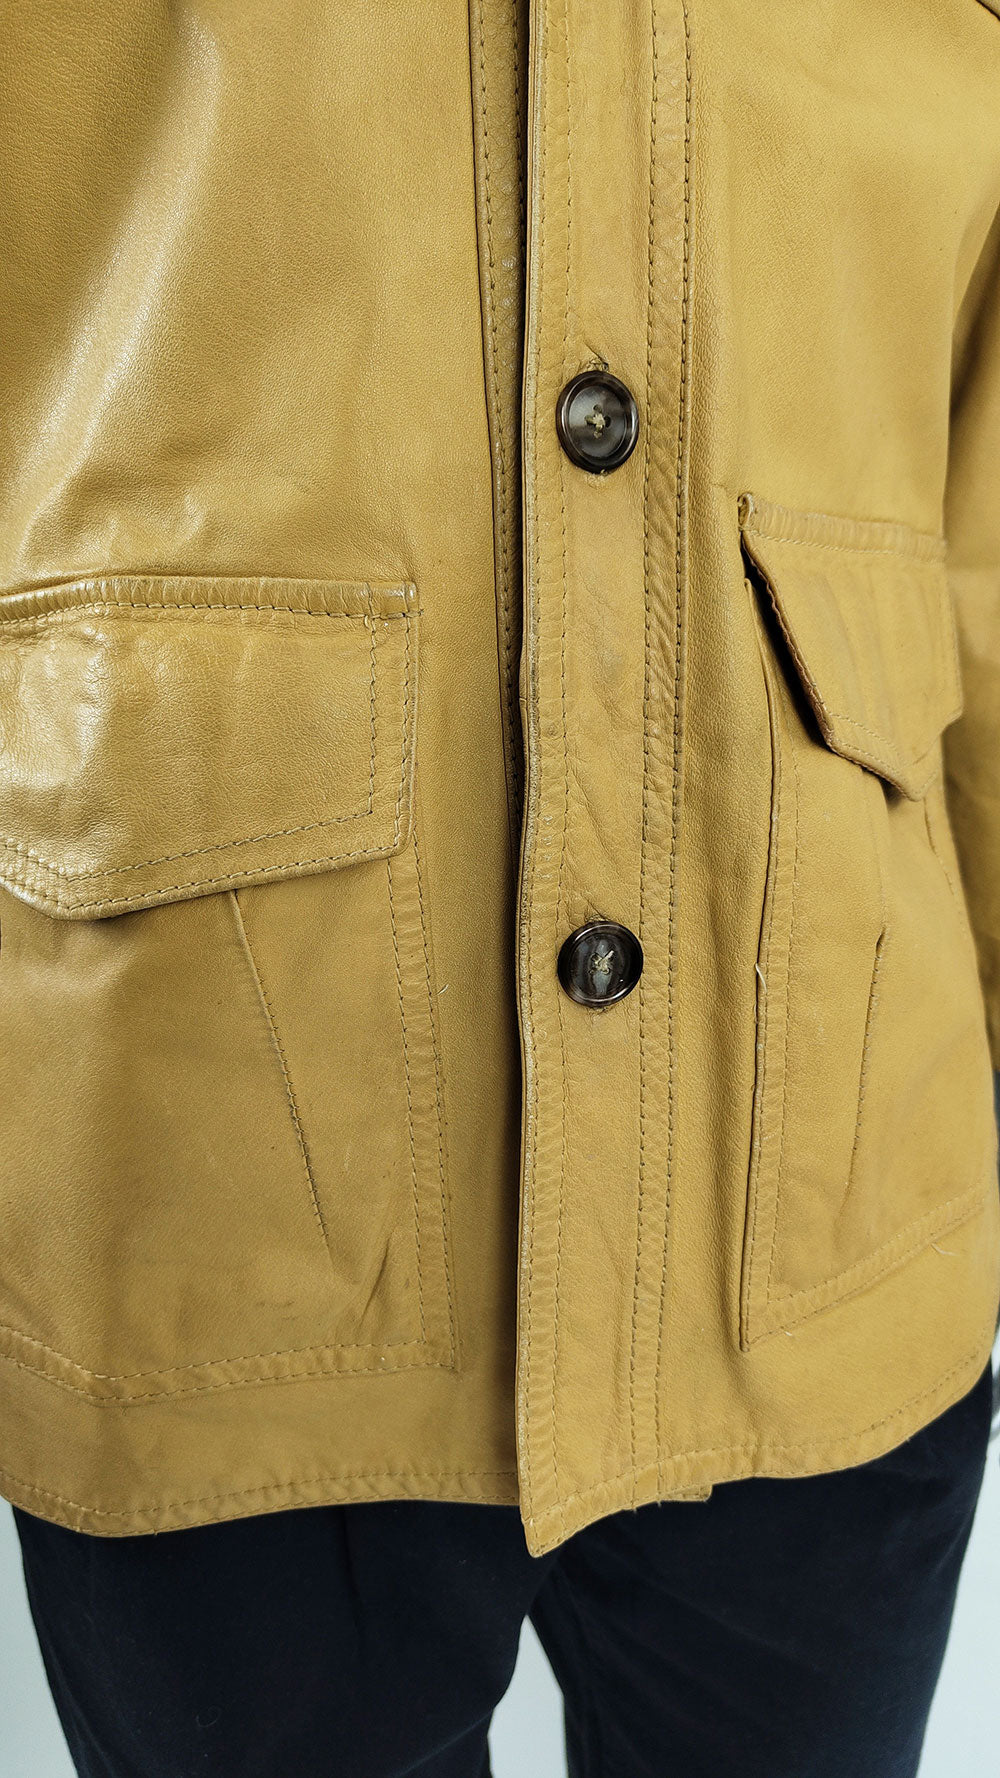 Rugged Vintage 70s Mens Yellow Real Leather Jacket